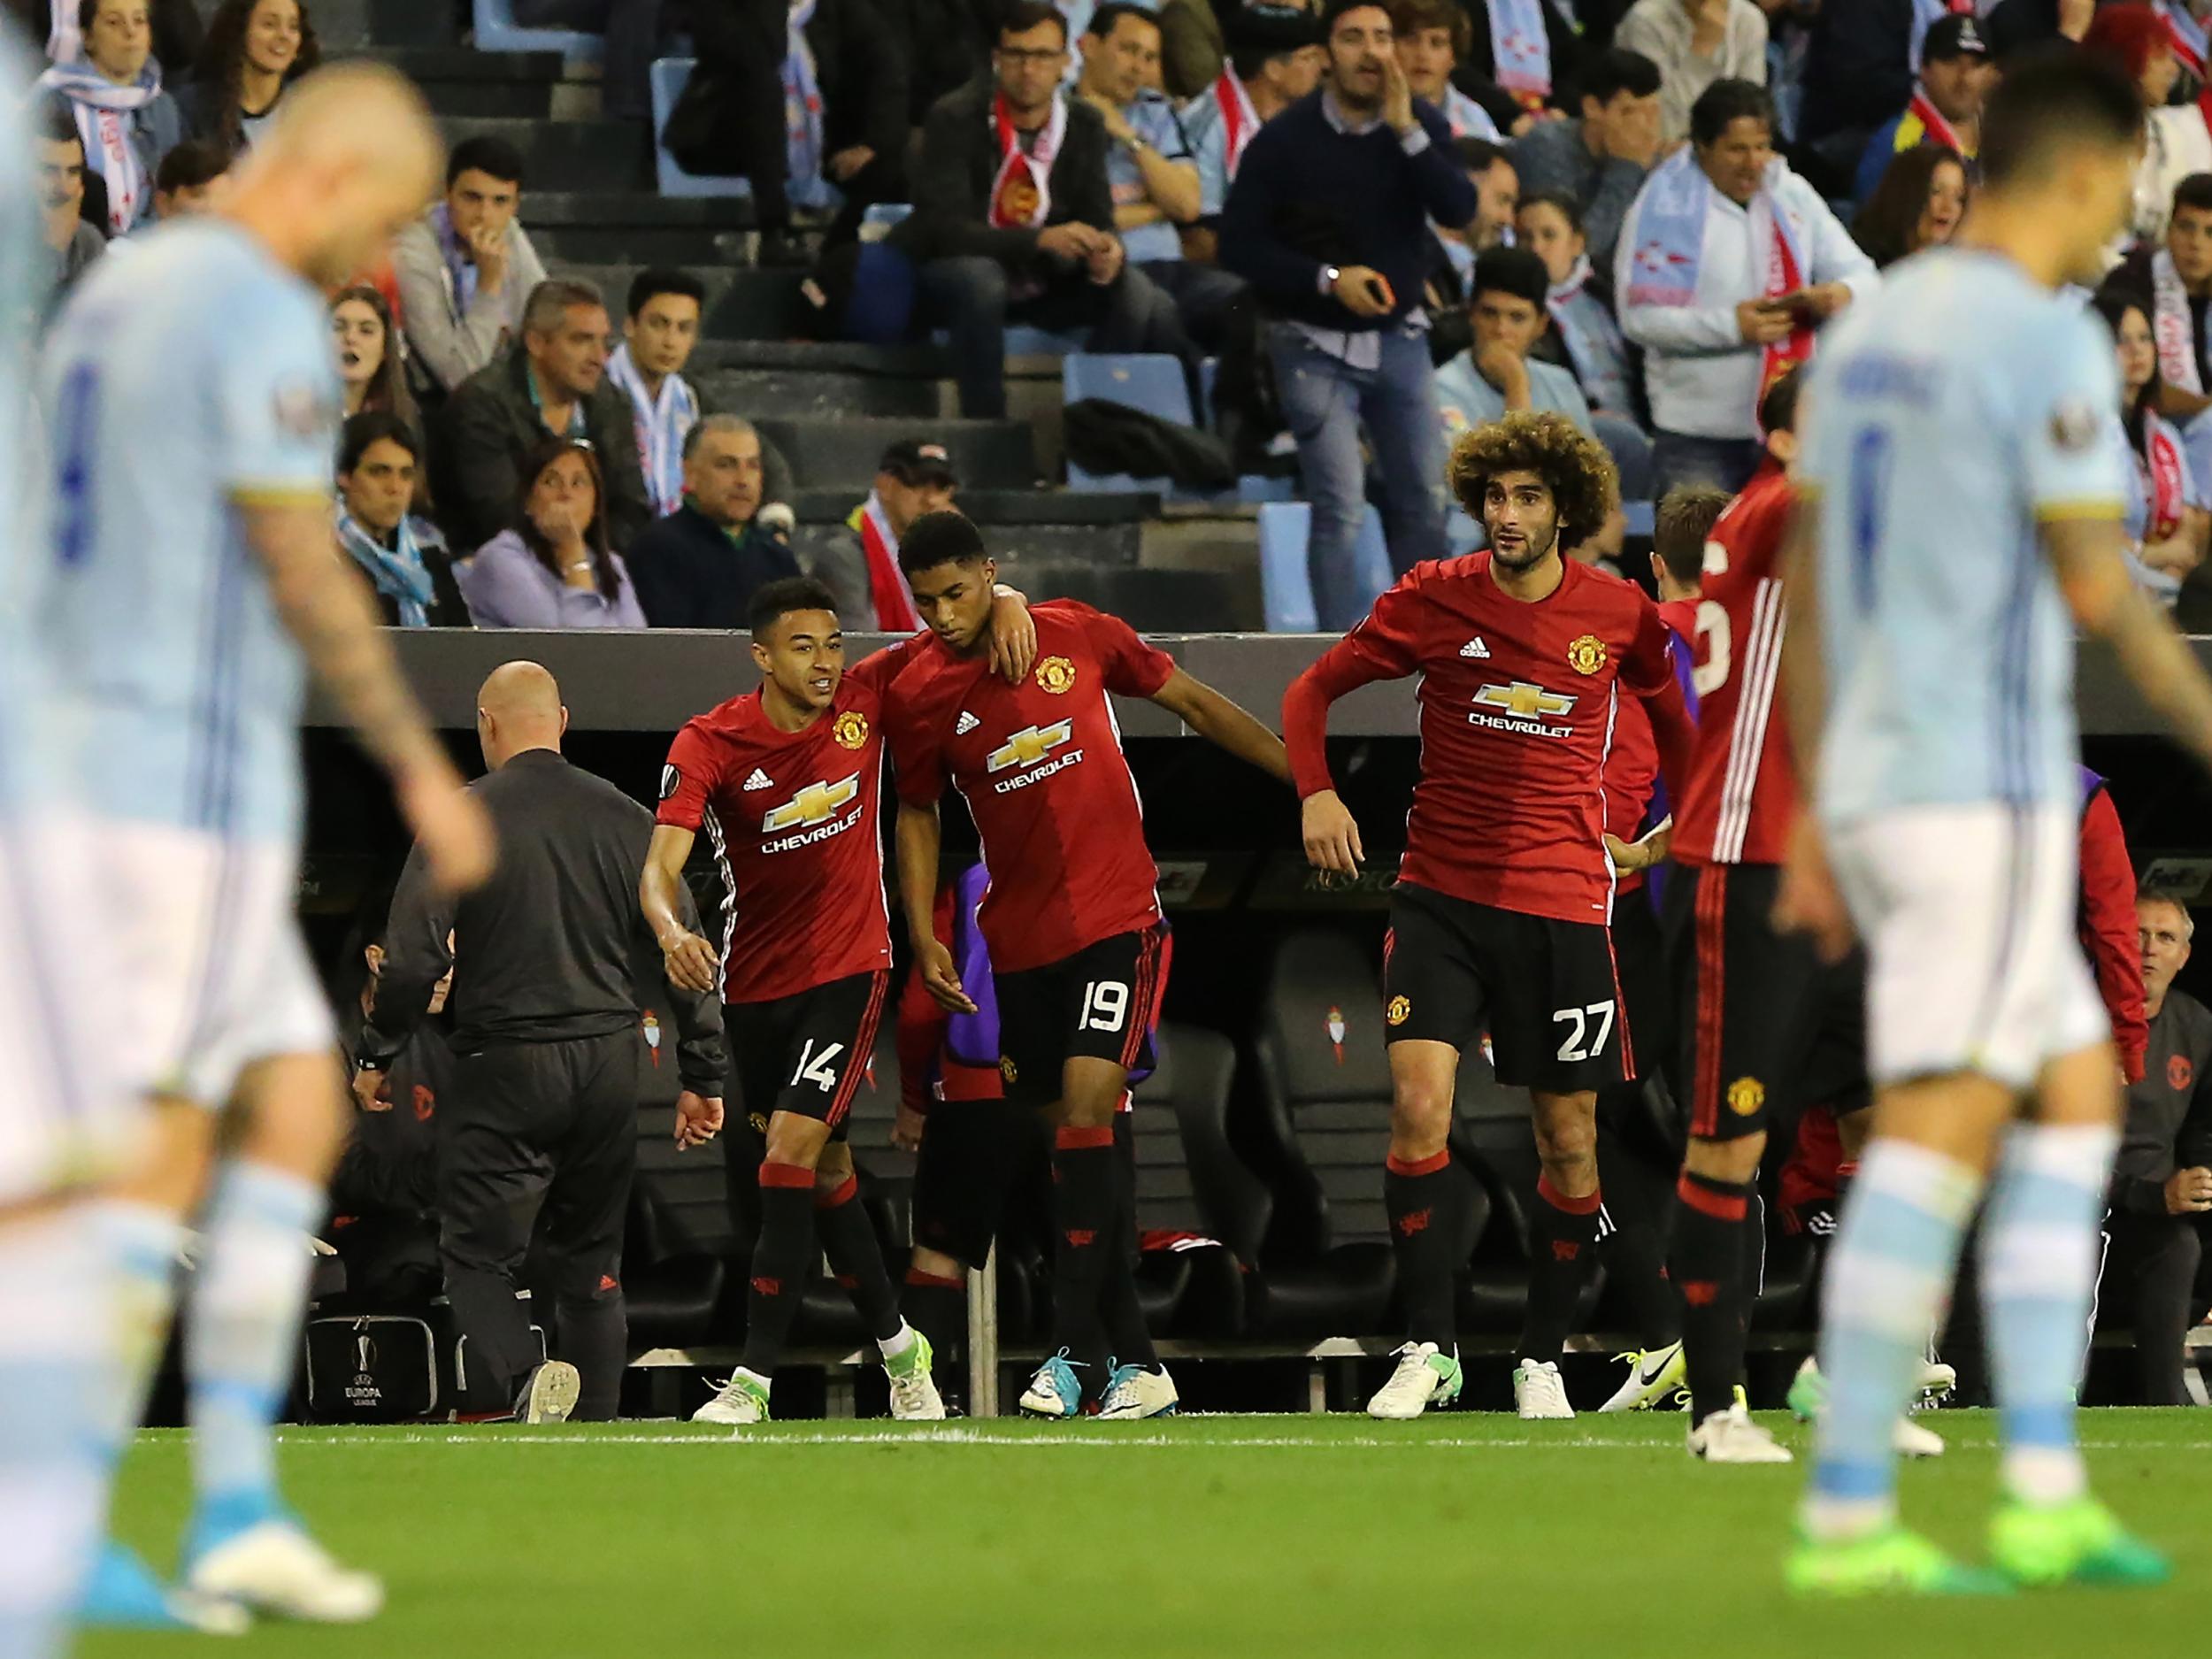 United looked in control for most of the game in Vigo